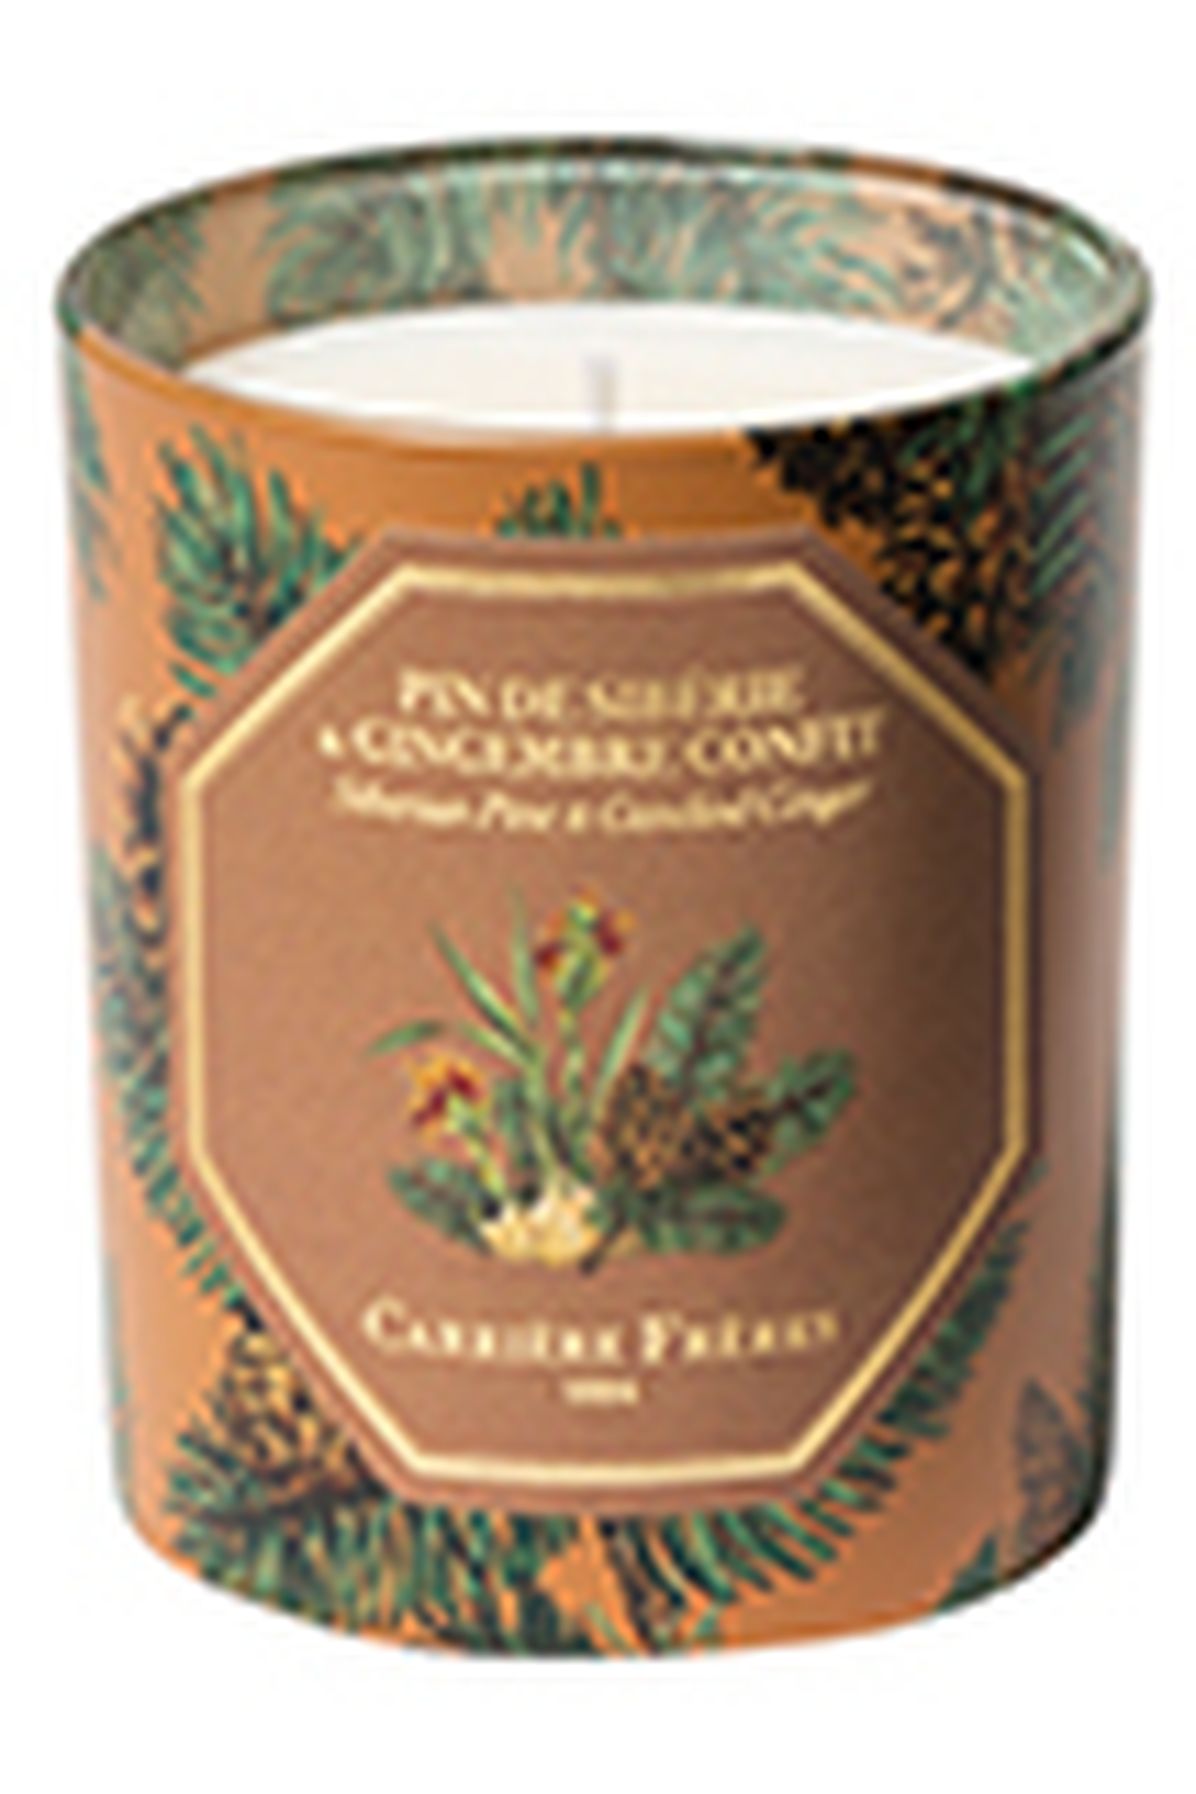  Scented Candle-Siberian Pine & Candied Ginger , 185g